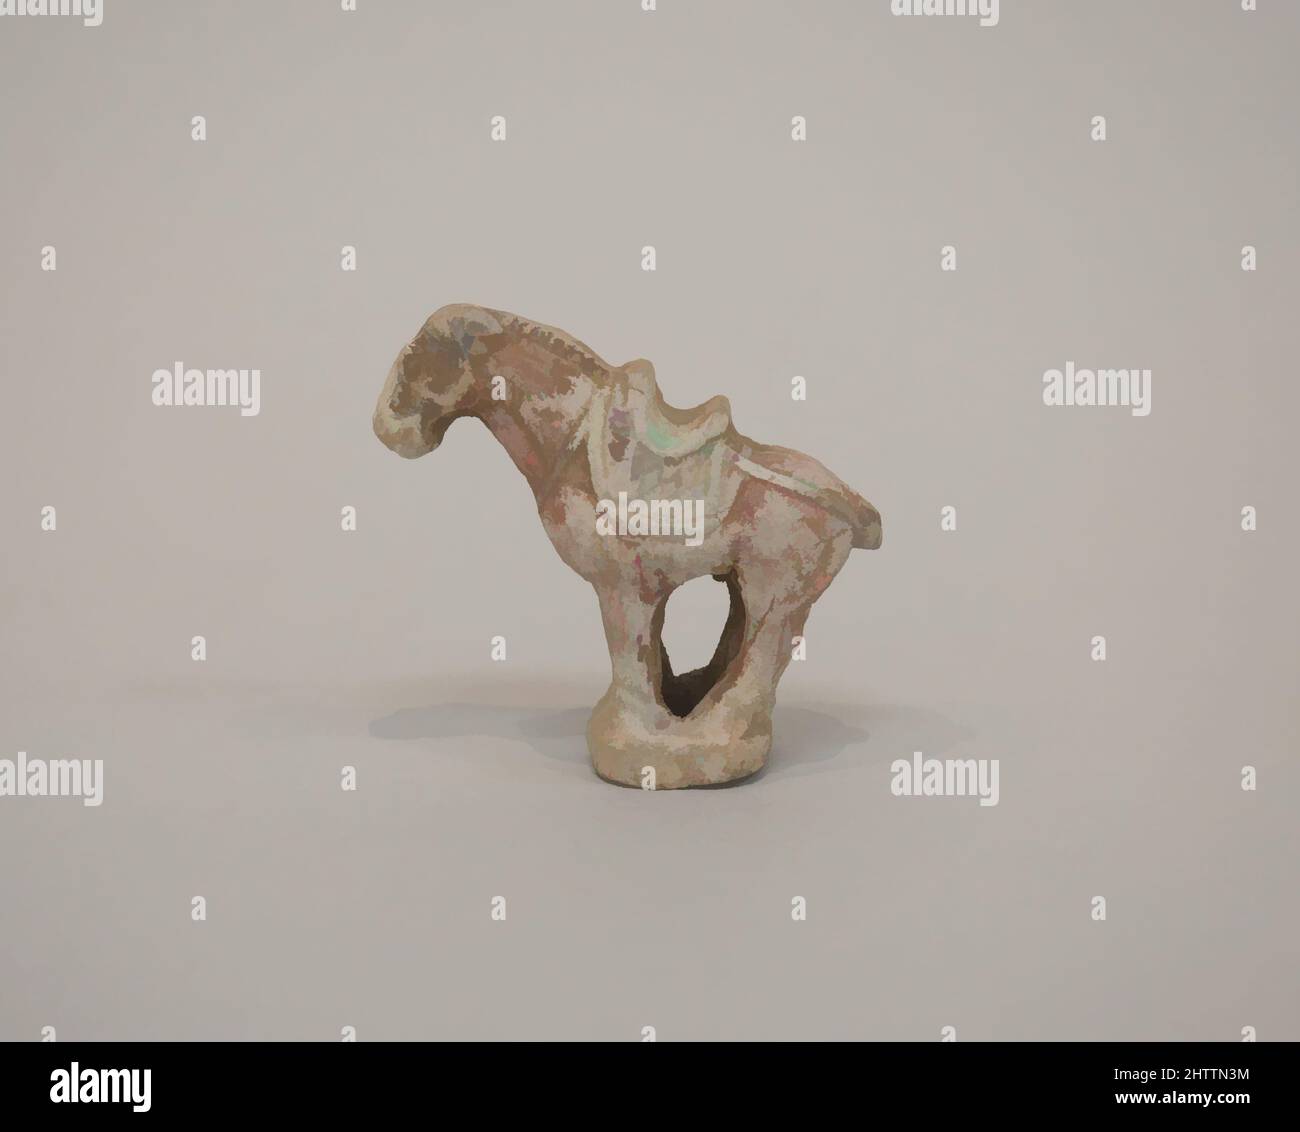 Art inspired by Miniature Figure of a Horse, Tang dynasty (618–907), China, Unglazed pottery, H. 3 3/4 in. (9.5 cm); W. 1 1/4 in. (3.2 cm); L. 3 in. (7.6 cm), Tomb Pottery, Classic works modernized by Artotop with a splash of modernity. Shapes, color and value, eye-catching visual impact on art. Emotions through freedom of artworks in a contemporary way. A timeless message pursuing a wildly creative new direction. Artists turning to the digital medium and creating the Artotop NFT Stock Photo